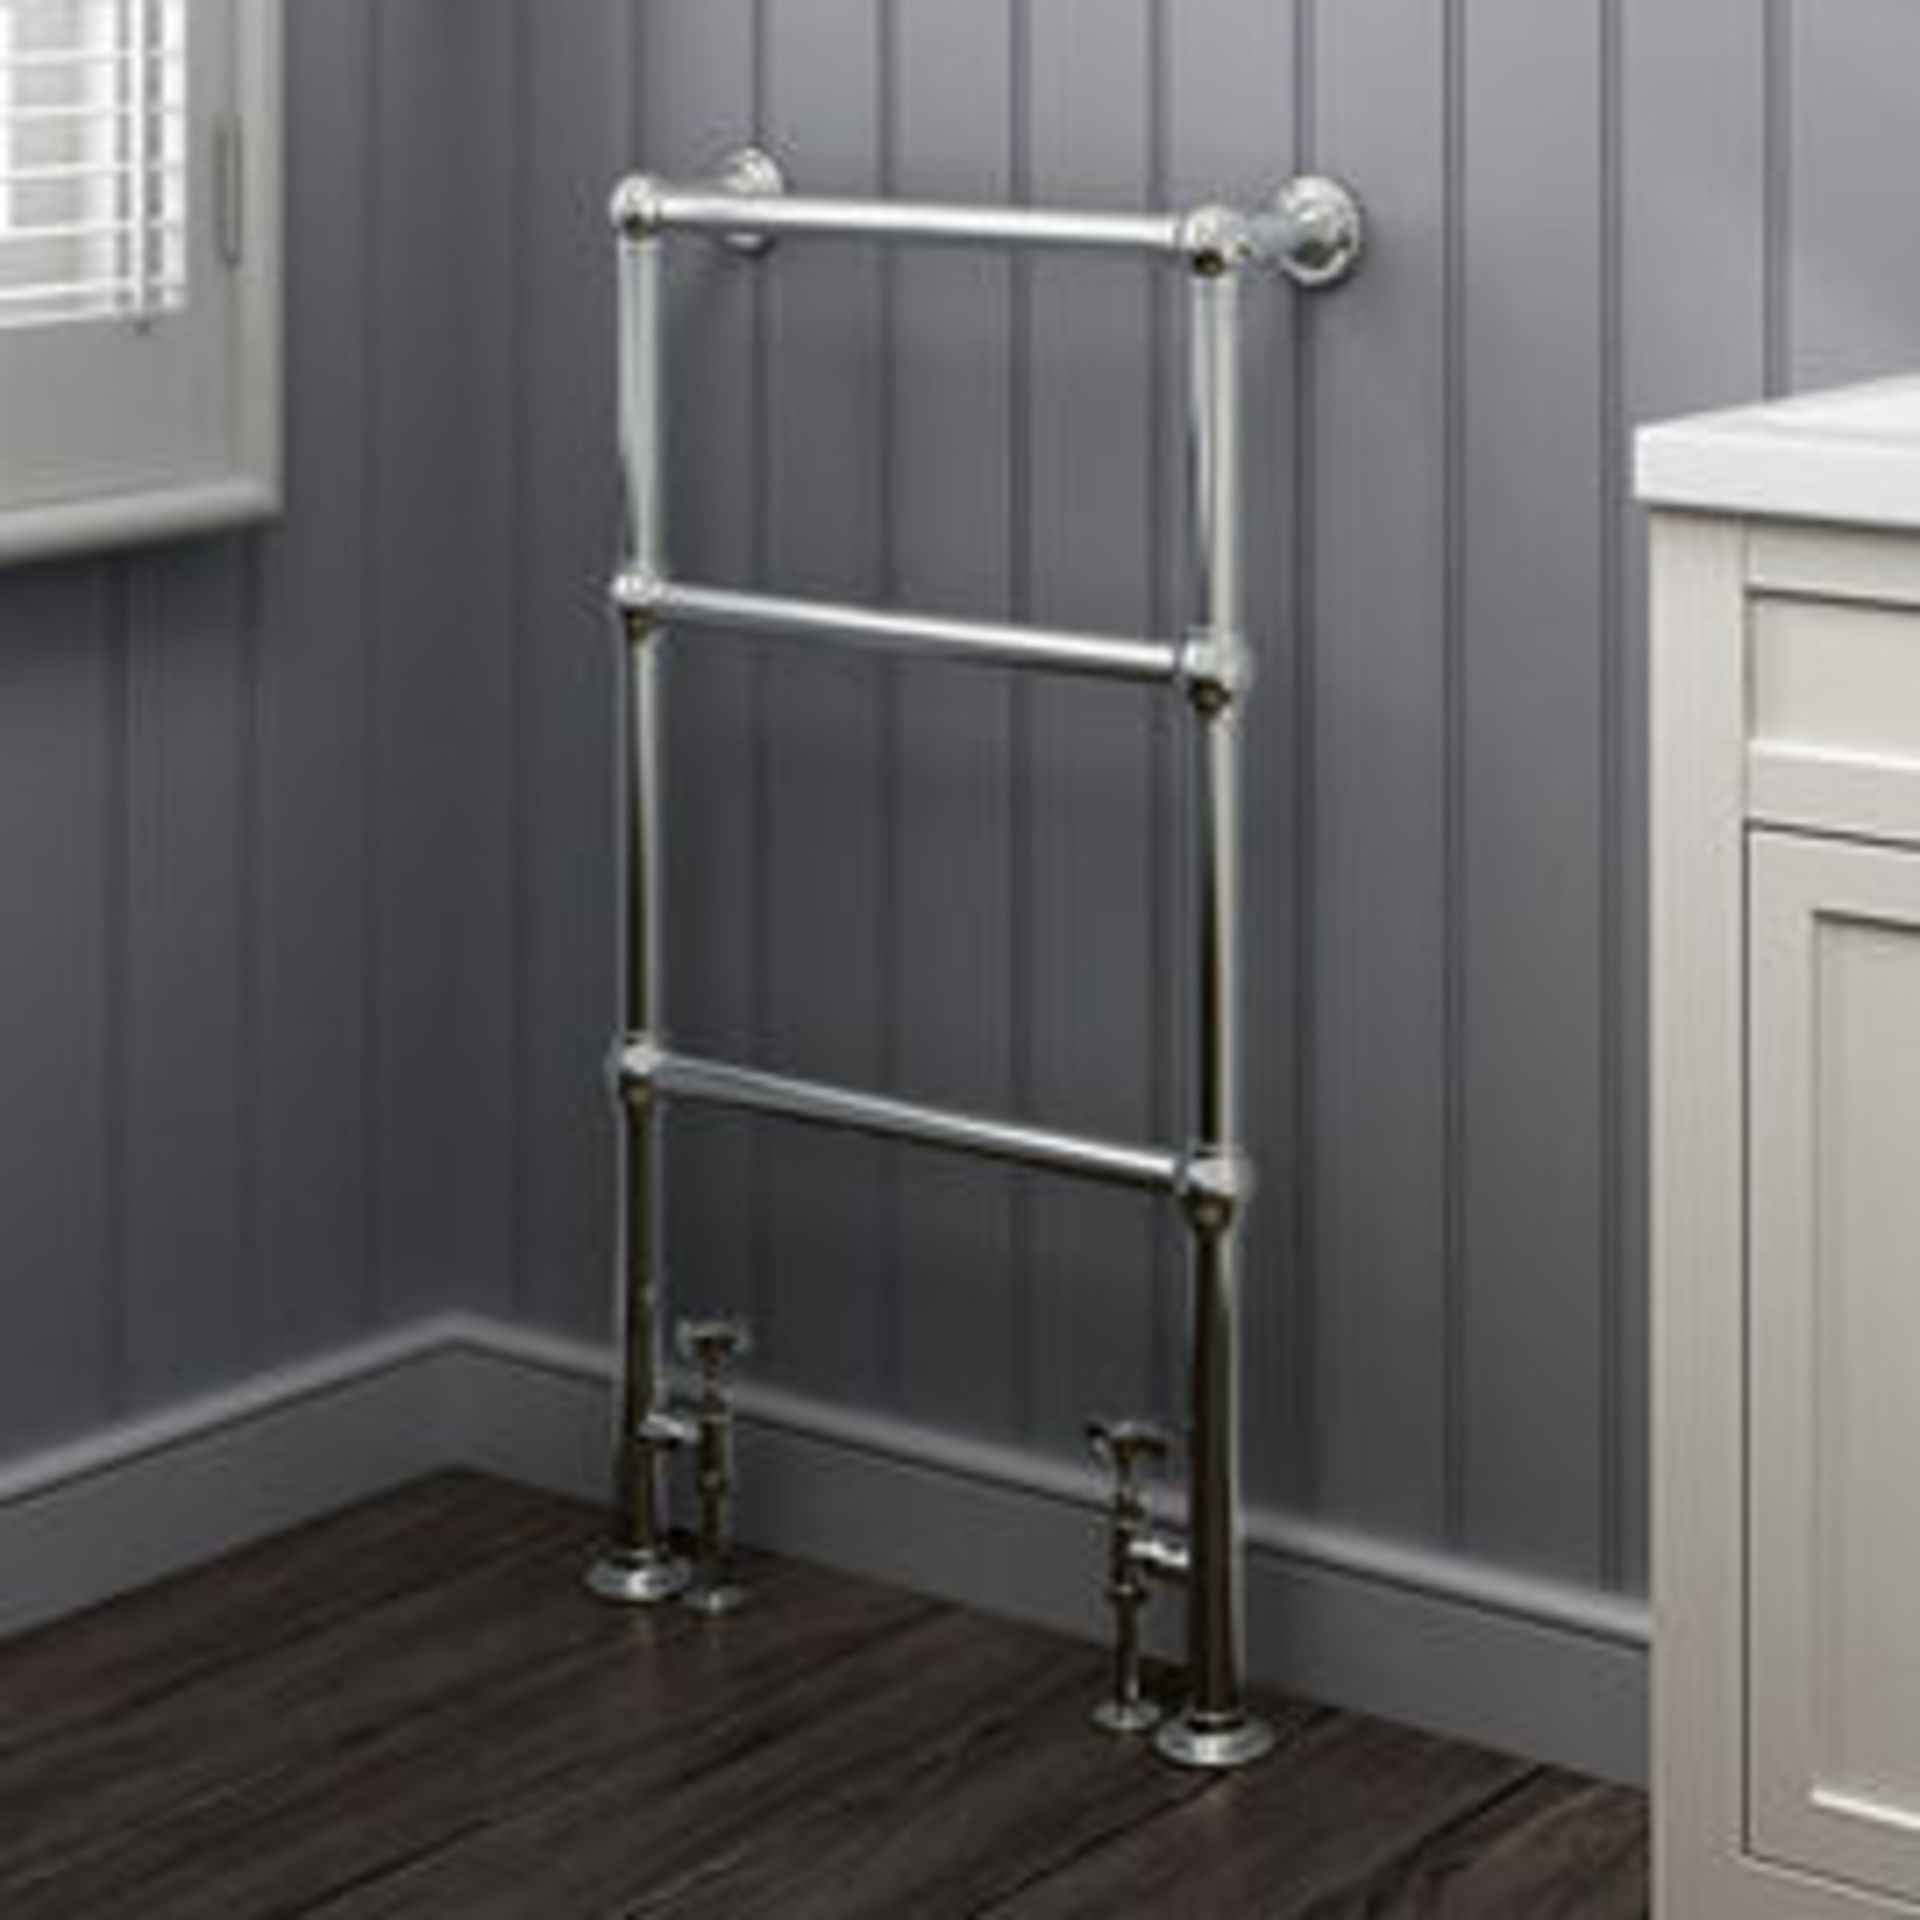 (G44) Traditional Chrome Towel Rail. RRP £379.99. Inspired by heritage designs and classic sty...